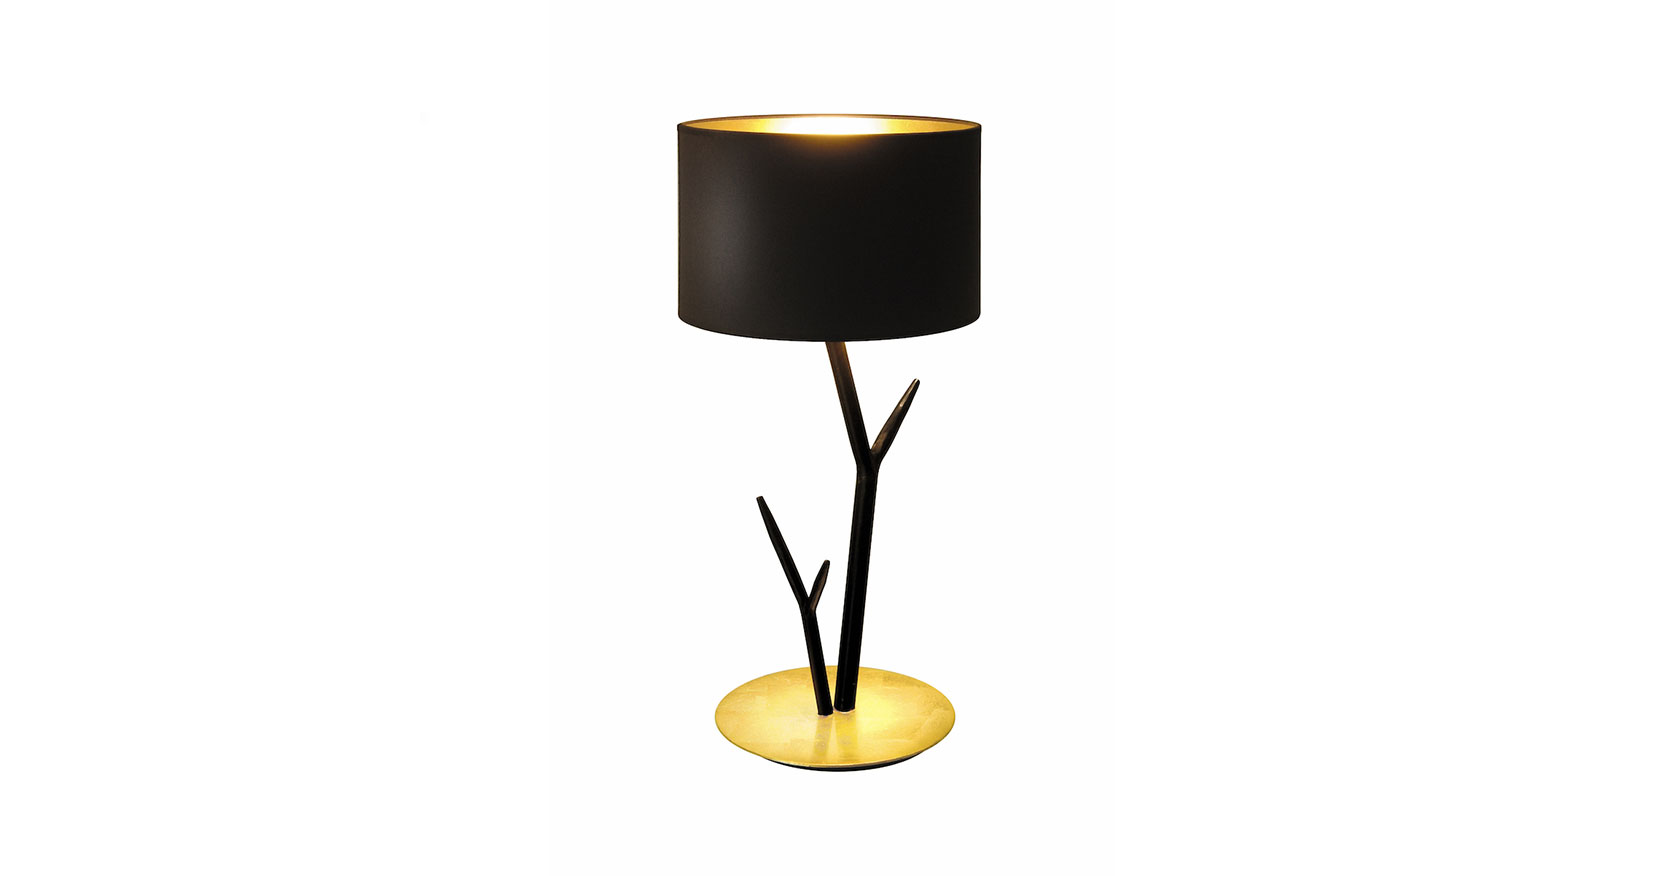 Eric Robin sculpted iron lamp. Gold leaf gilded base with black patinated iron braches, the central stem supports lampshade with a shiny gold interior and black exterior.